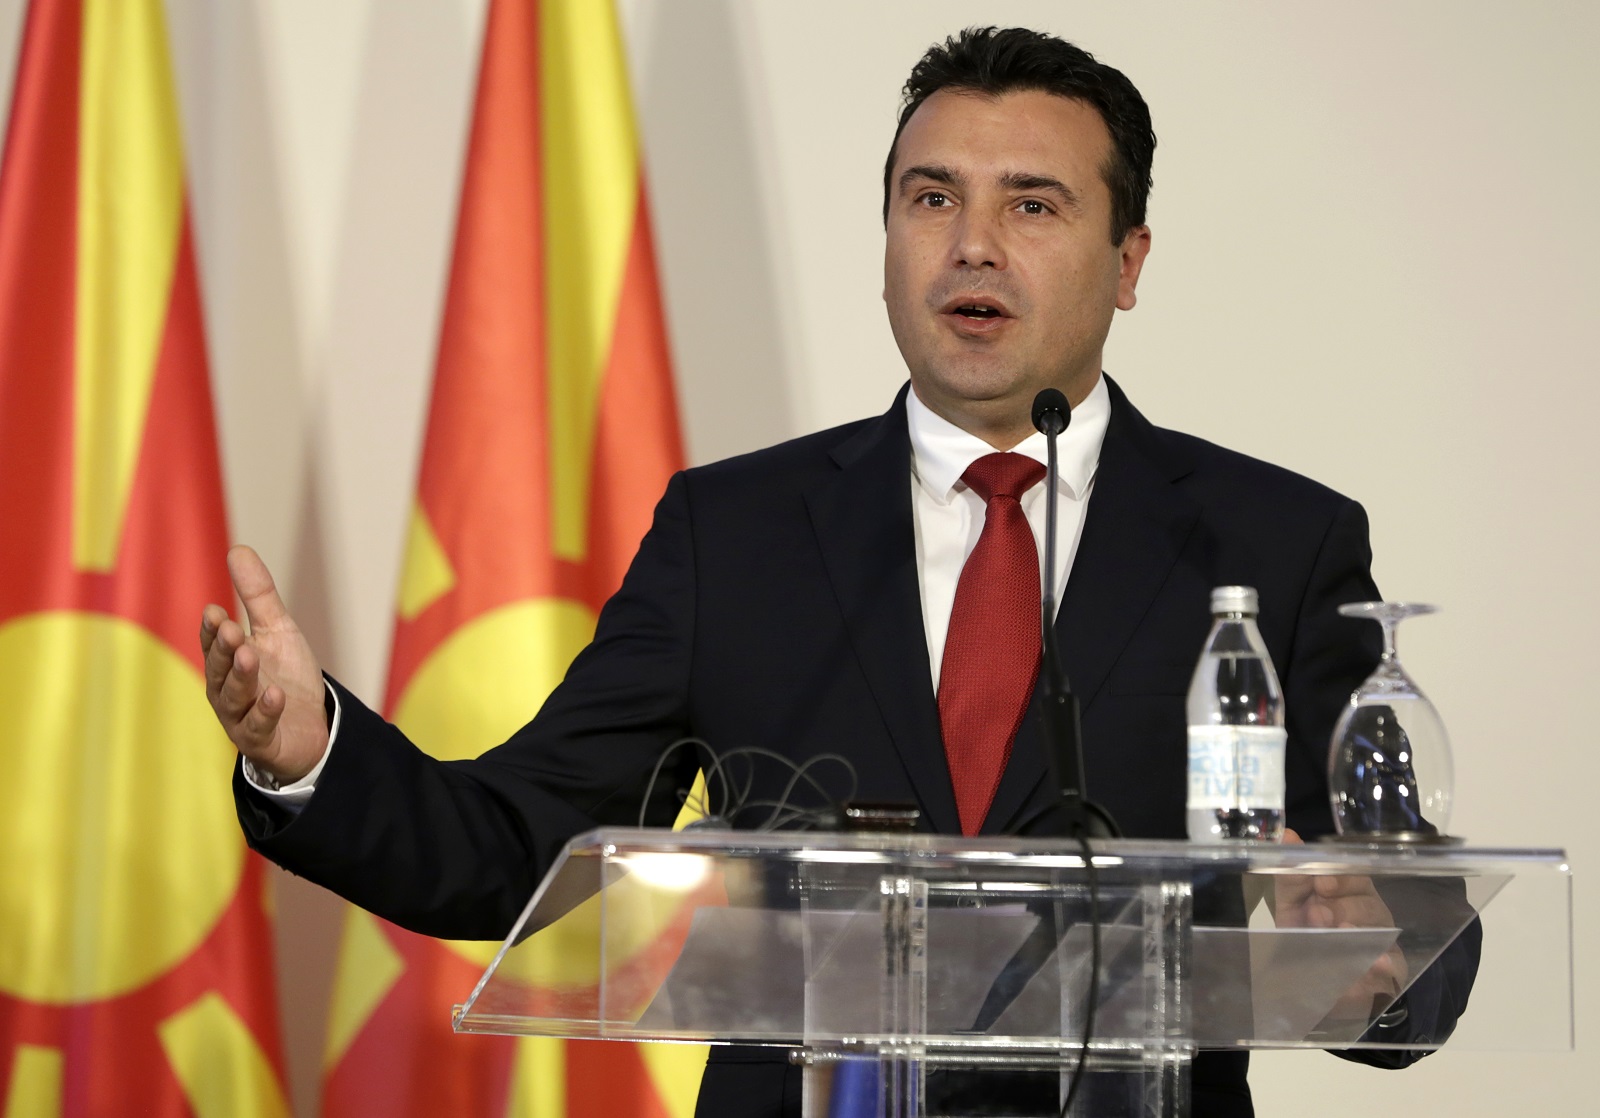 epa09556677 (FILE) North Macedonian Prime Minister Zoran Zaev (R) gestures during the press conference after the Serbia, North Macedonia and Albania high level trilateral meeting in Novi Sad, Serbia, 10 October 2019 (reissued 31 October 2021). North Macedonian Prime Minister Zoran Zaev on 31 October 2021 announced his resignation as a Prime Minister and from the leader of SDSM Party, after his party lost in the second round of local elections.  EPA/ANDREJ CUKIC *** Local Caption *** 55536619